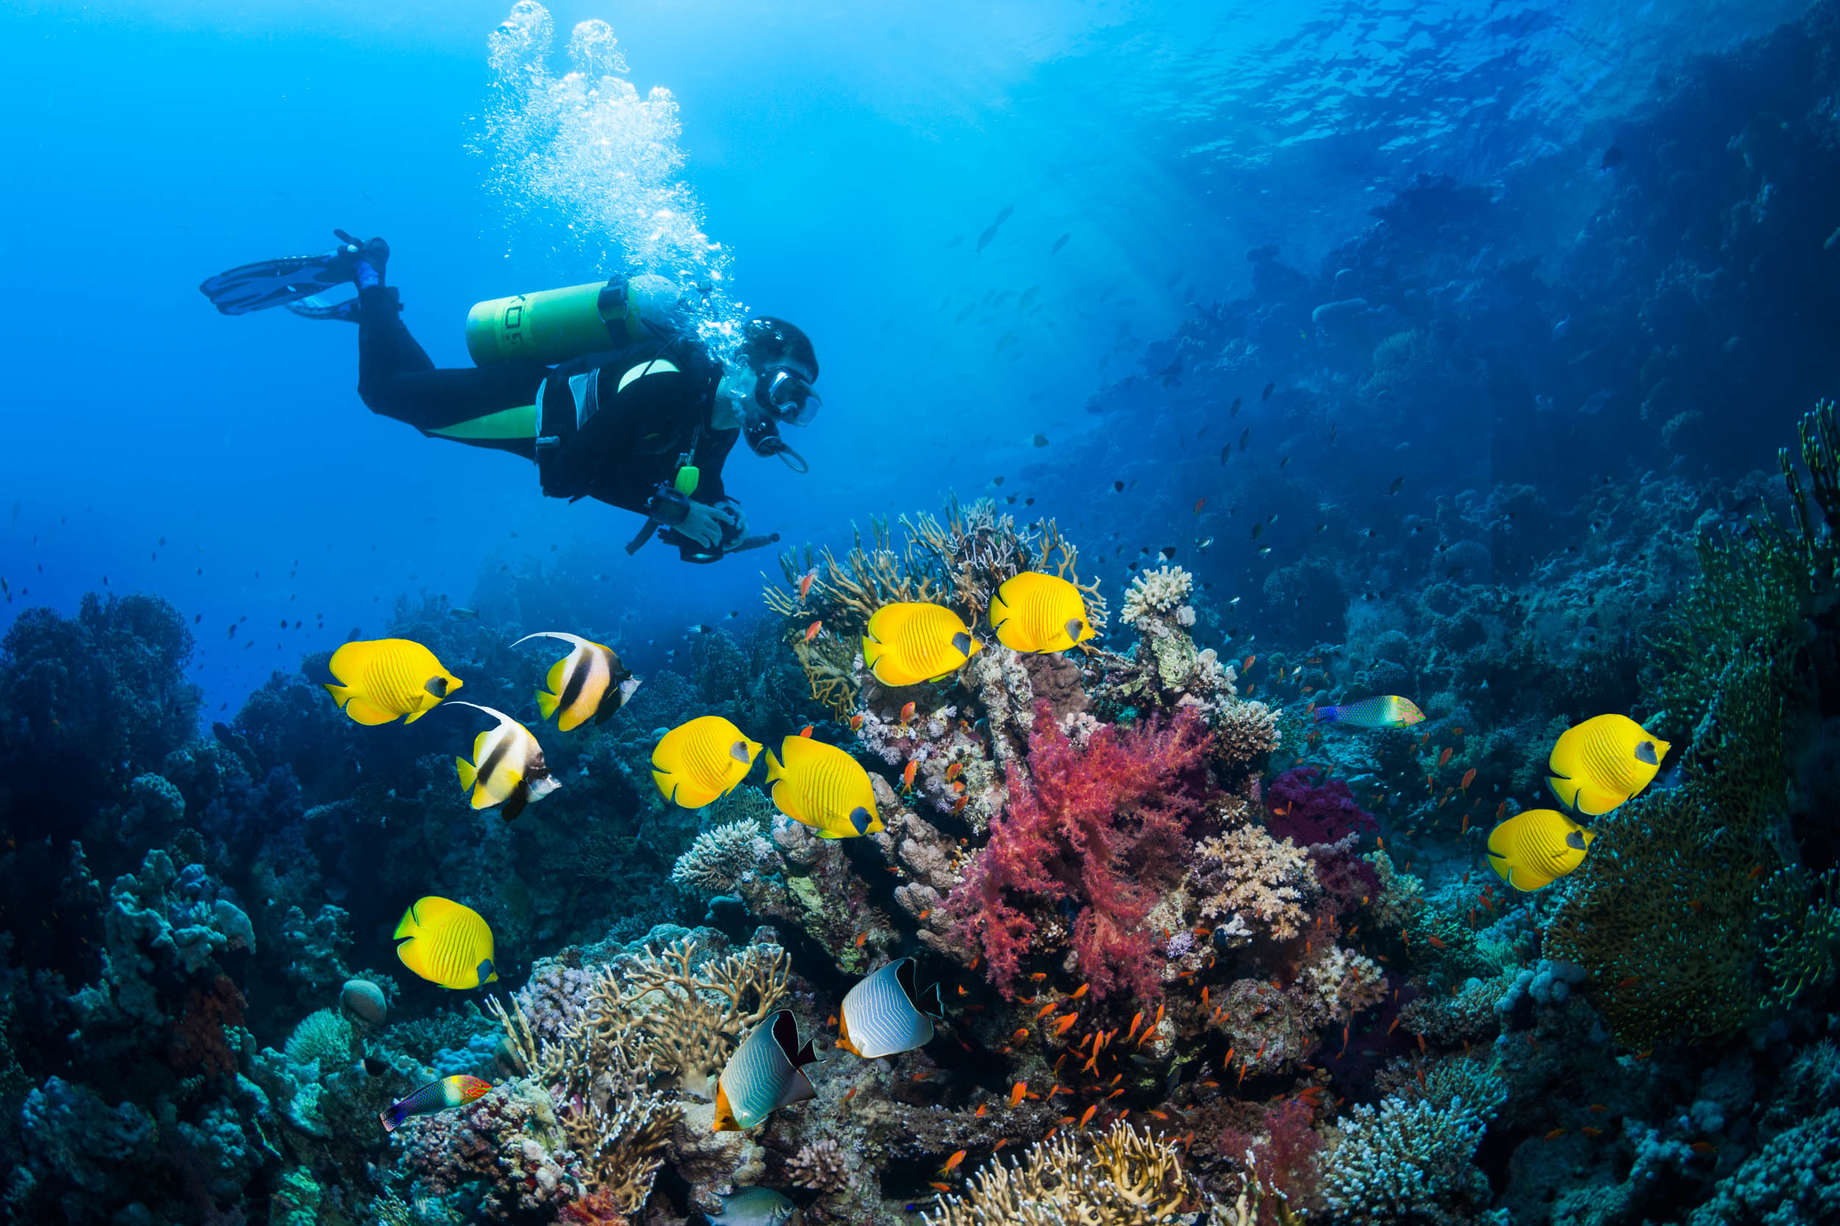 A scuba diver explores a vibrant coral reef teeming with colorful fish in Nha Trang, Vietnam.